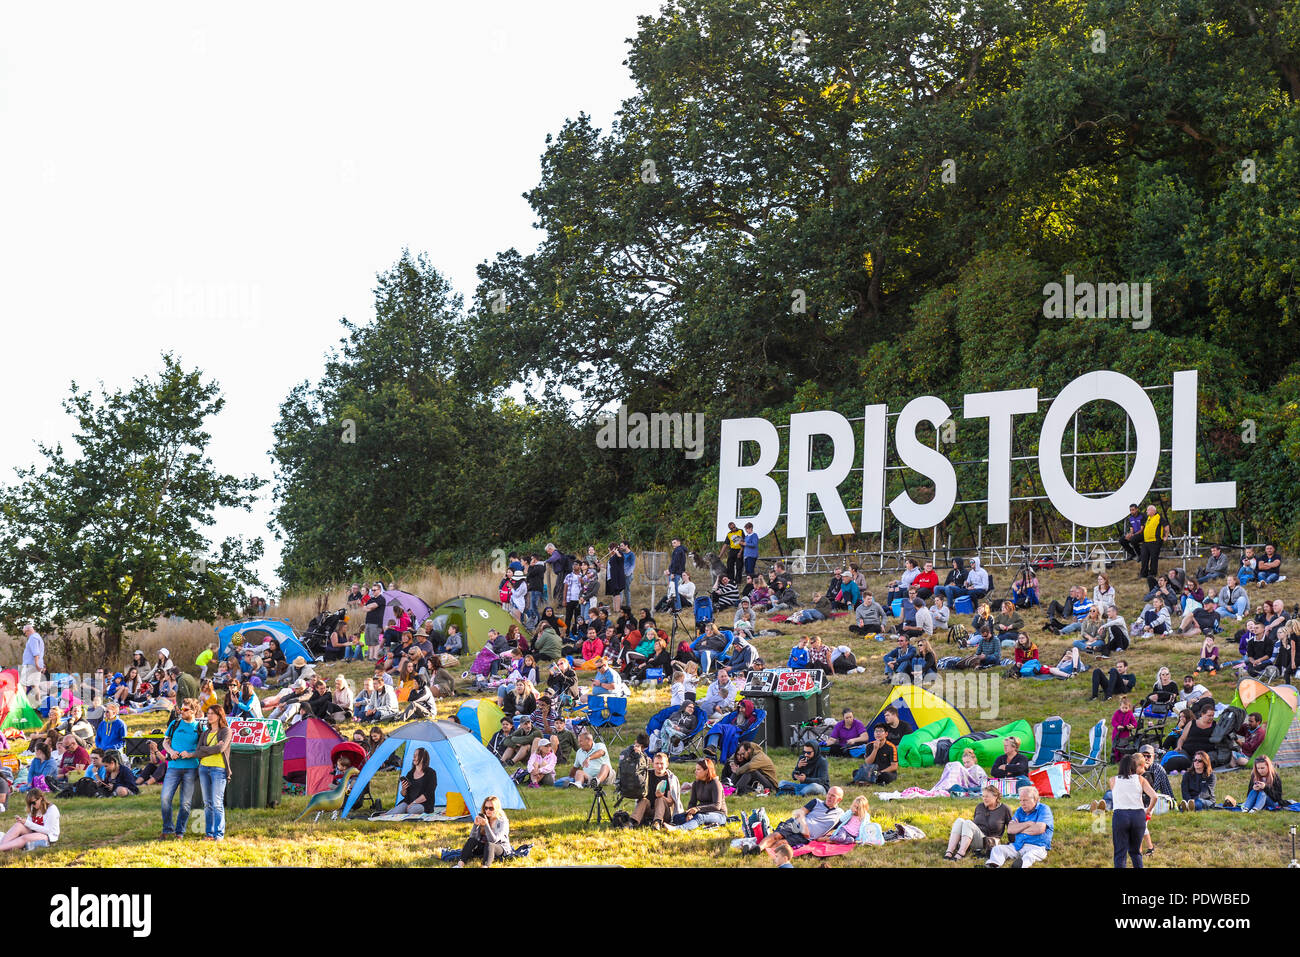 Bristol. Lettering at the Bristol International Balloon Fiesta. Crowd. Audience. People. Mound. Crowds, tents Stock Photo